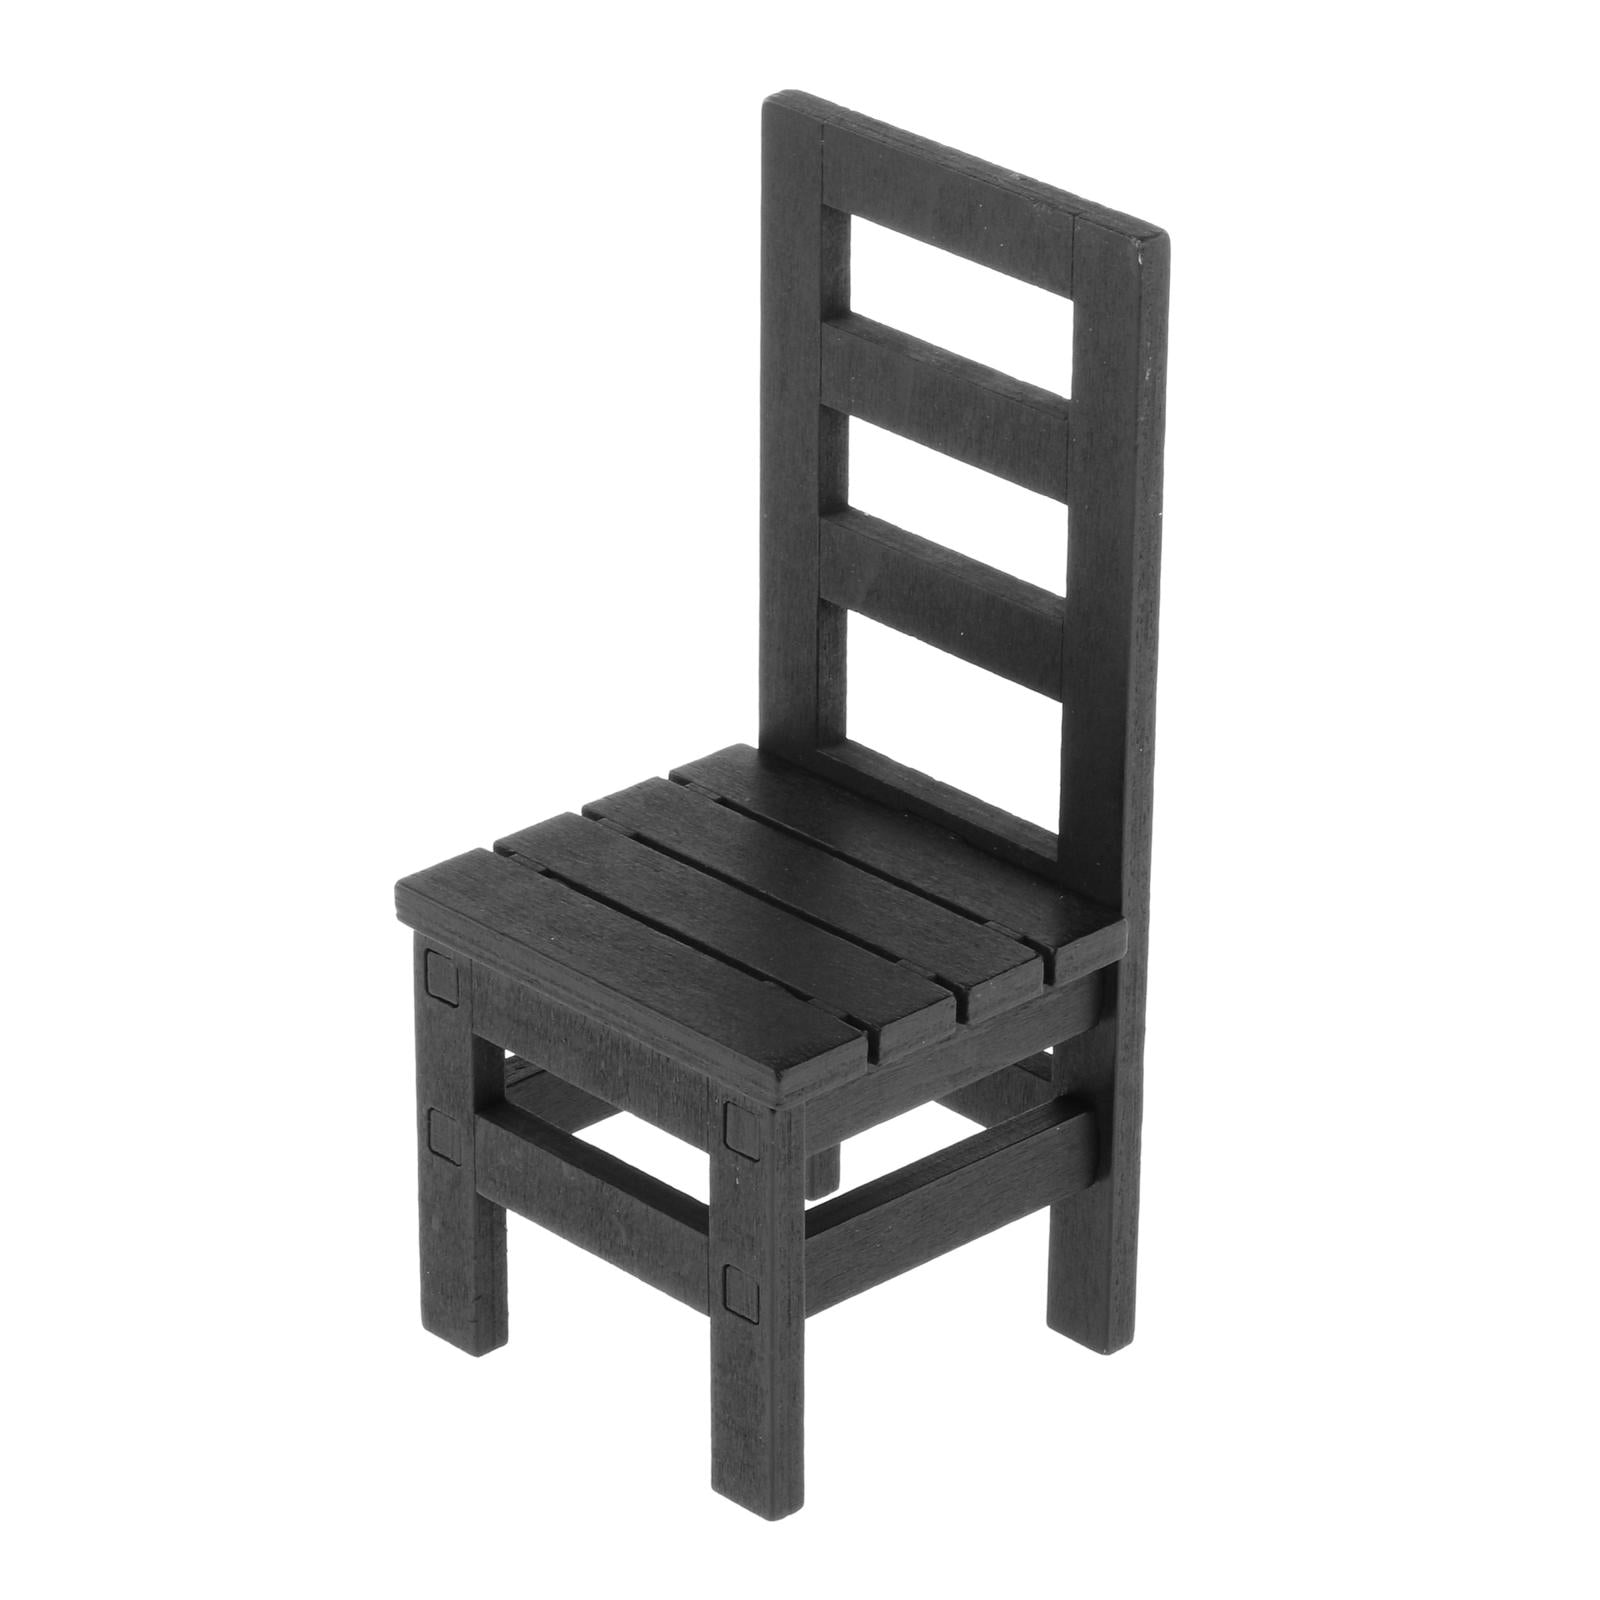 1/6 Scale Furniture for 12" Action Figures Miniature Furniture Chair Black